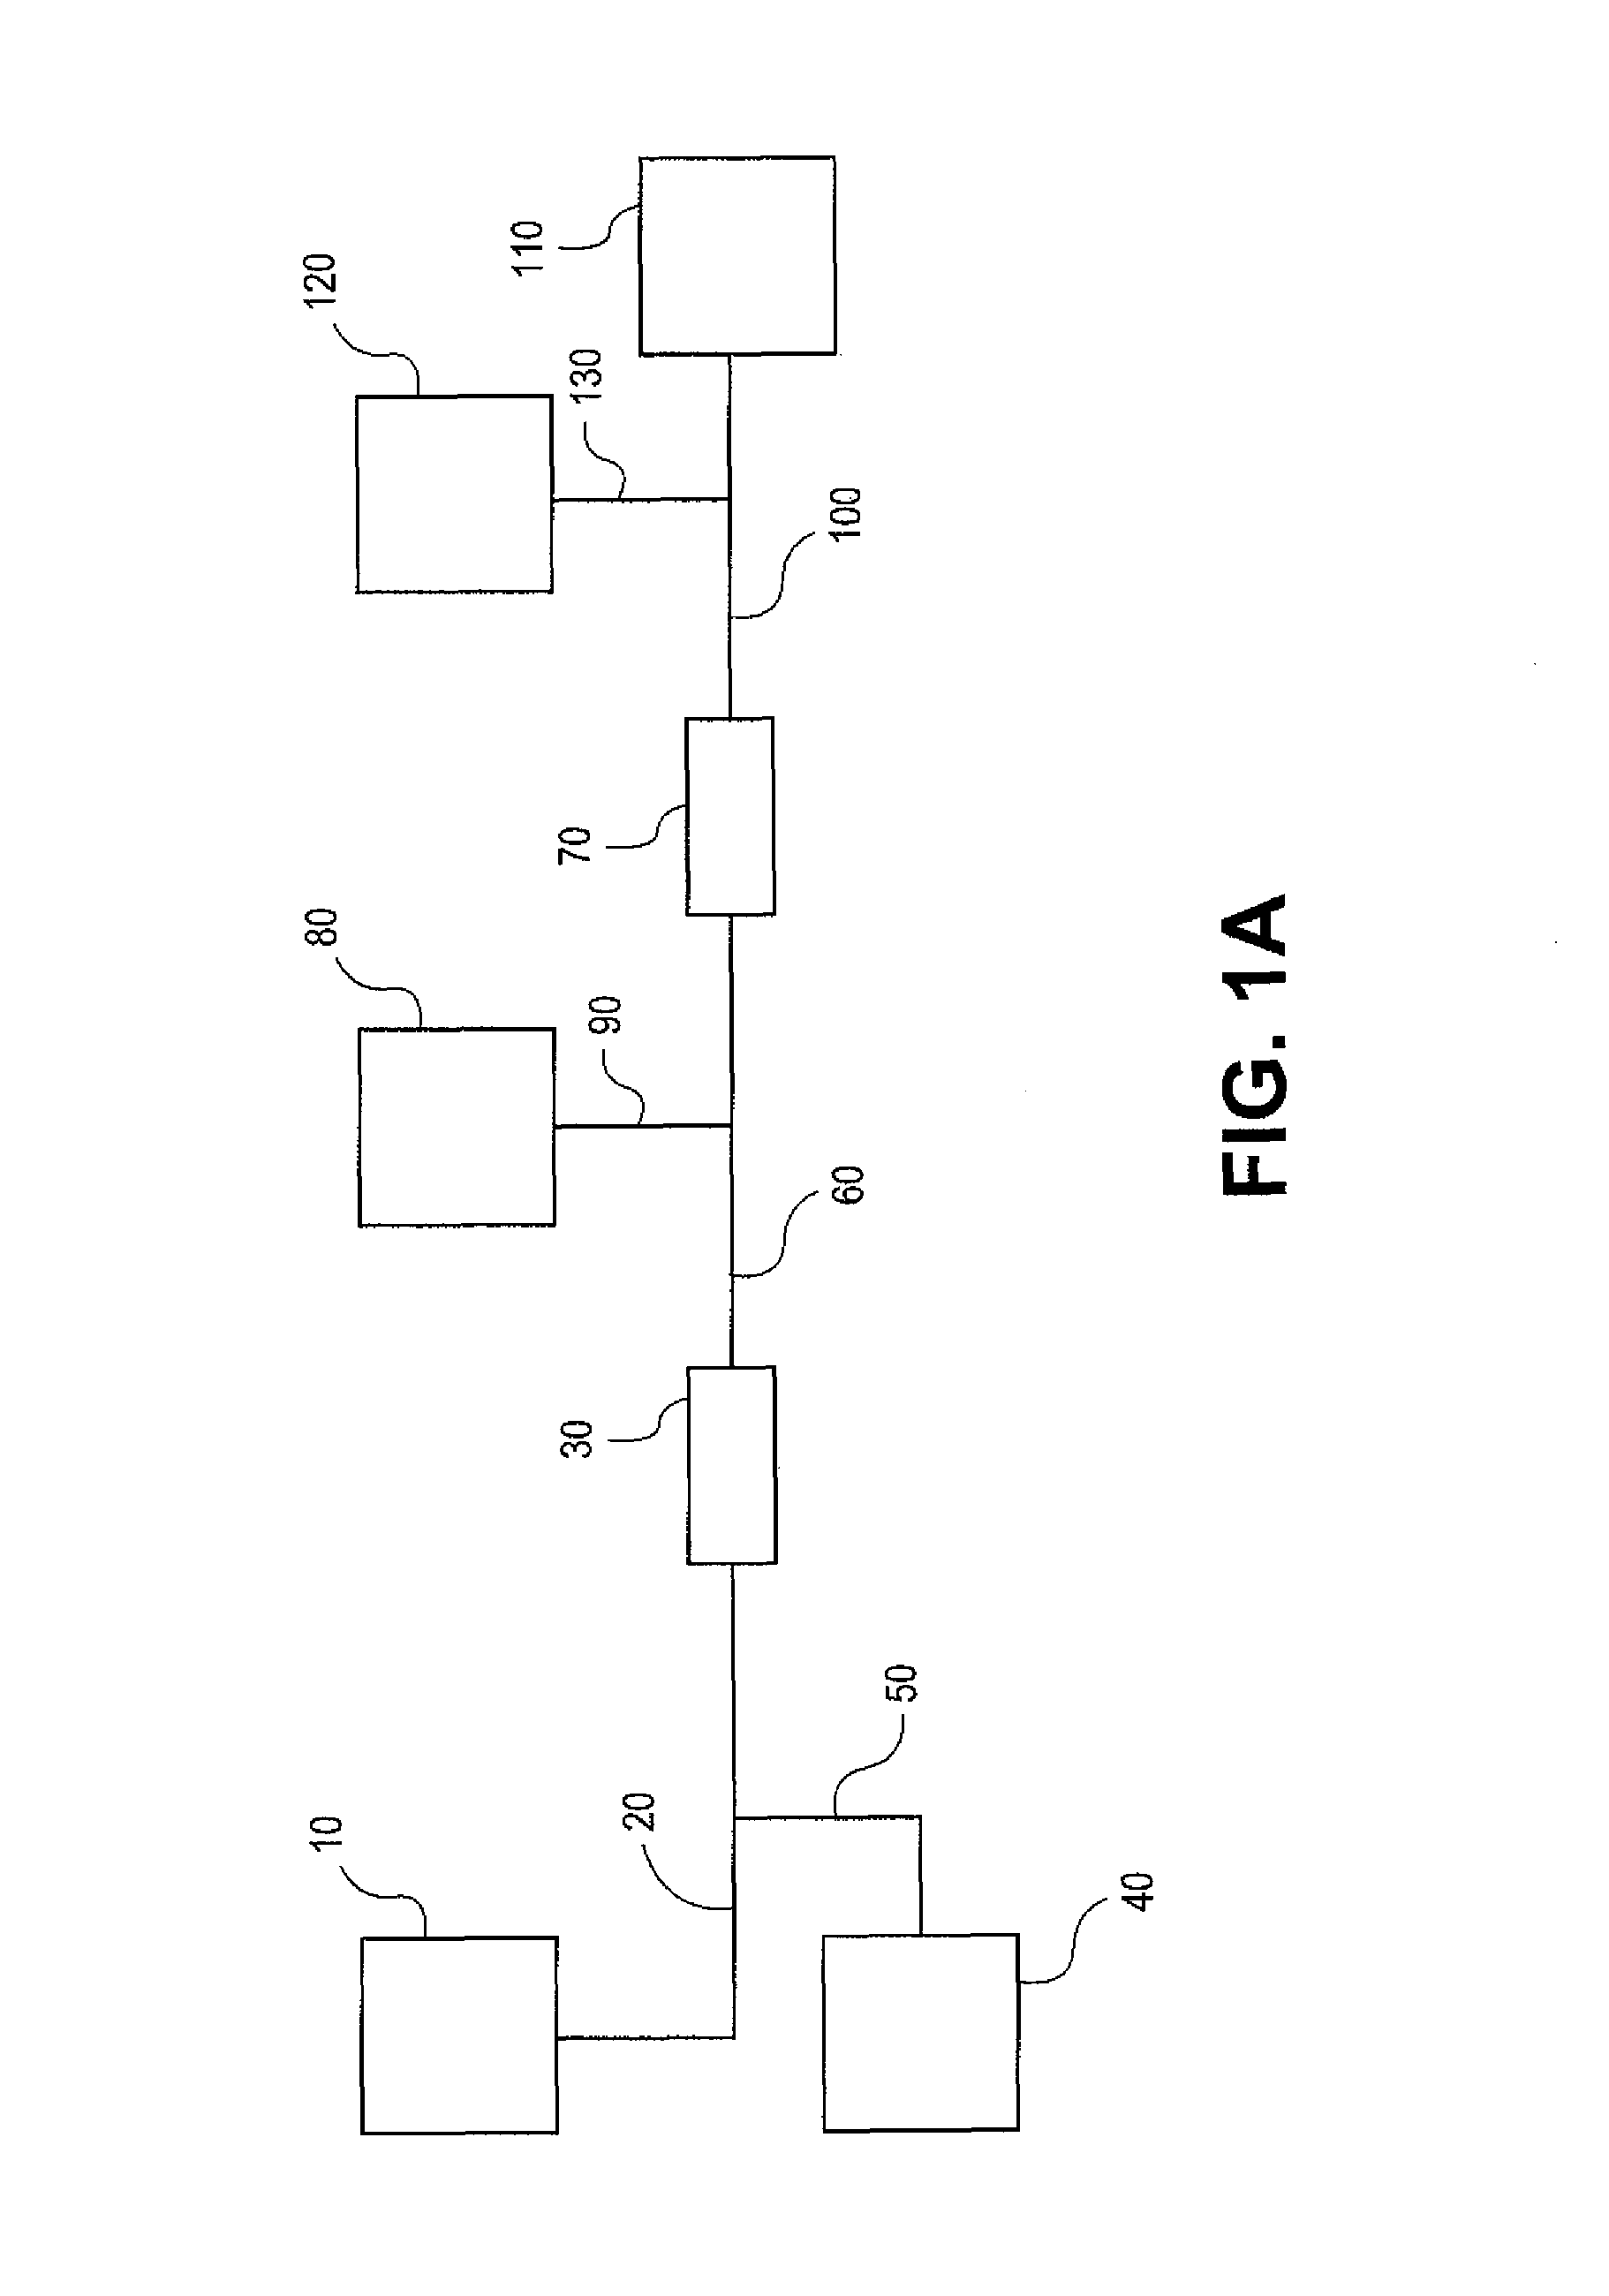 Methods for purifying nucleic acids